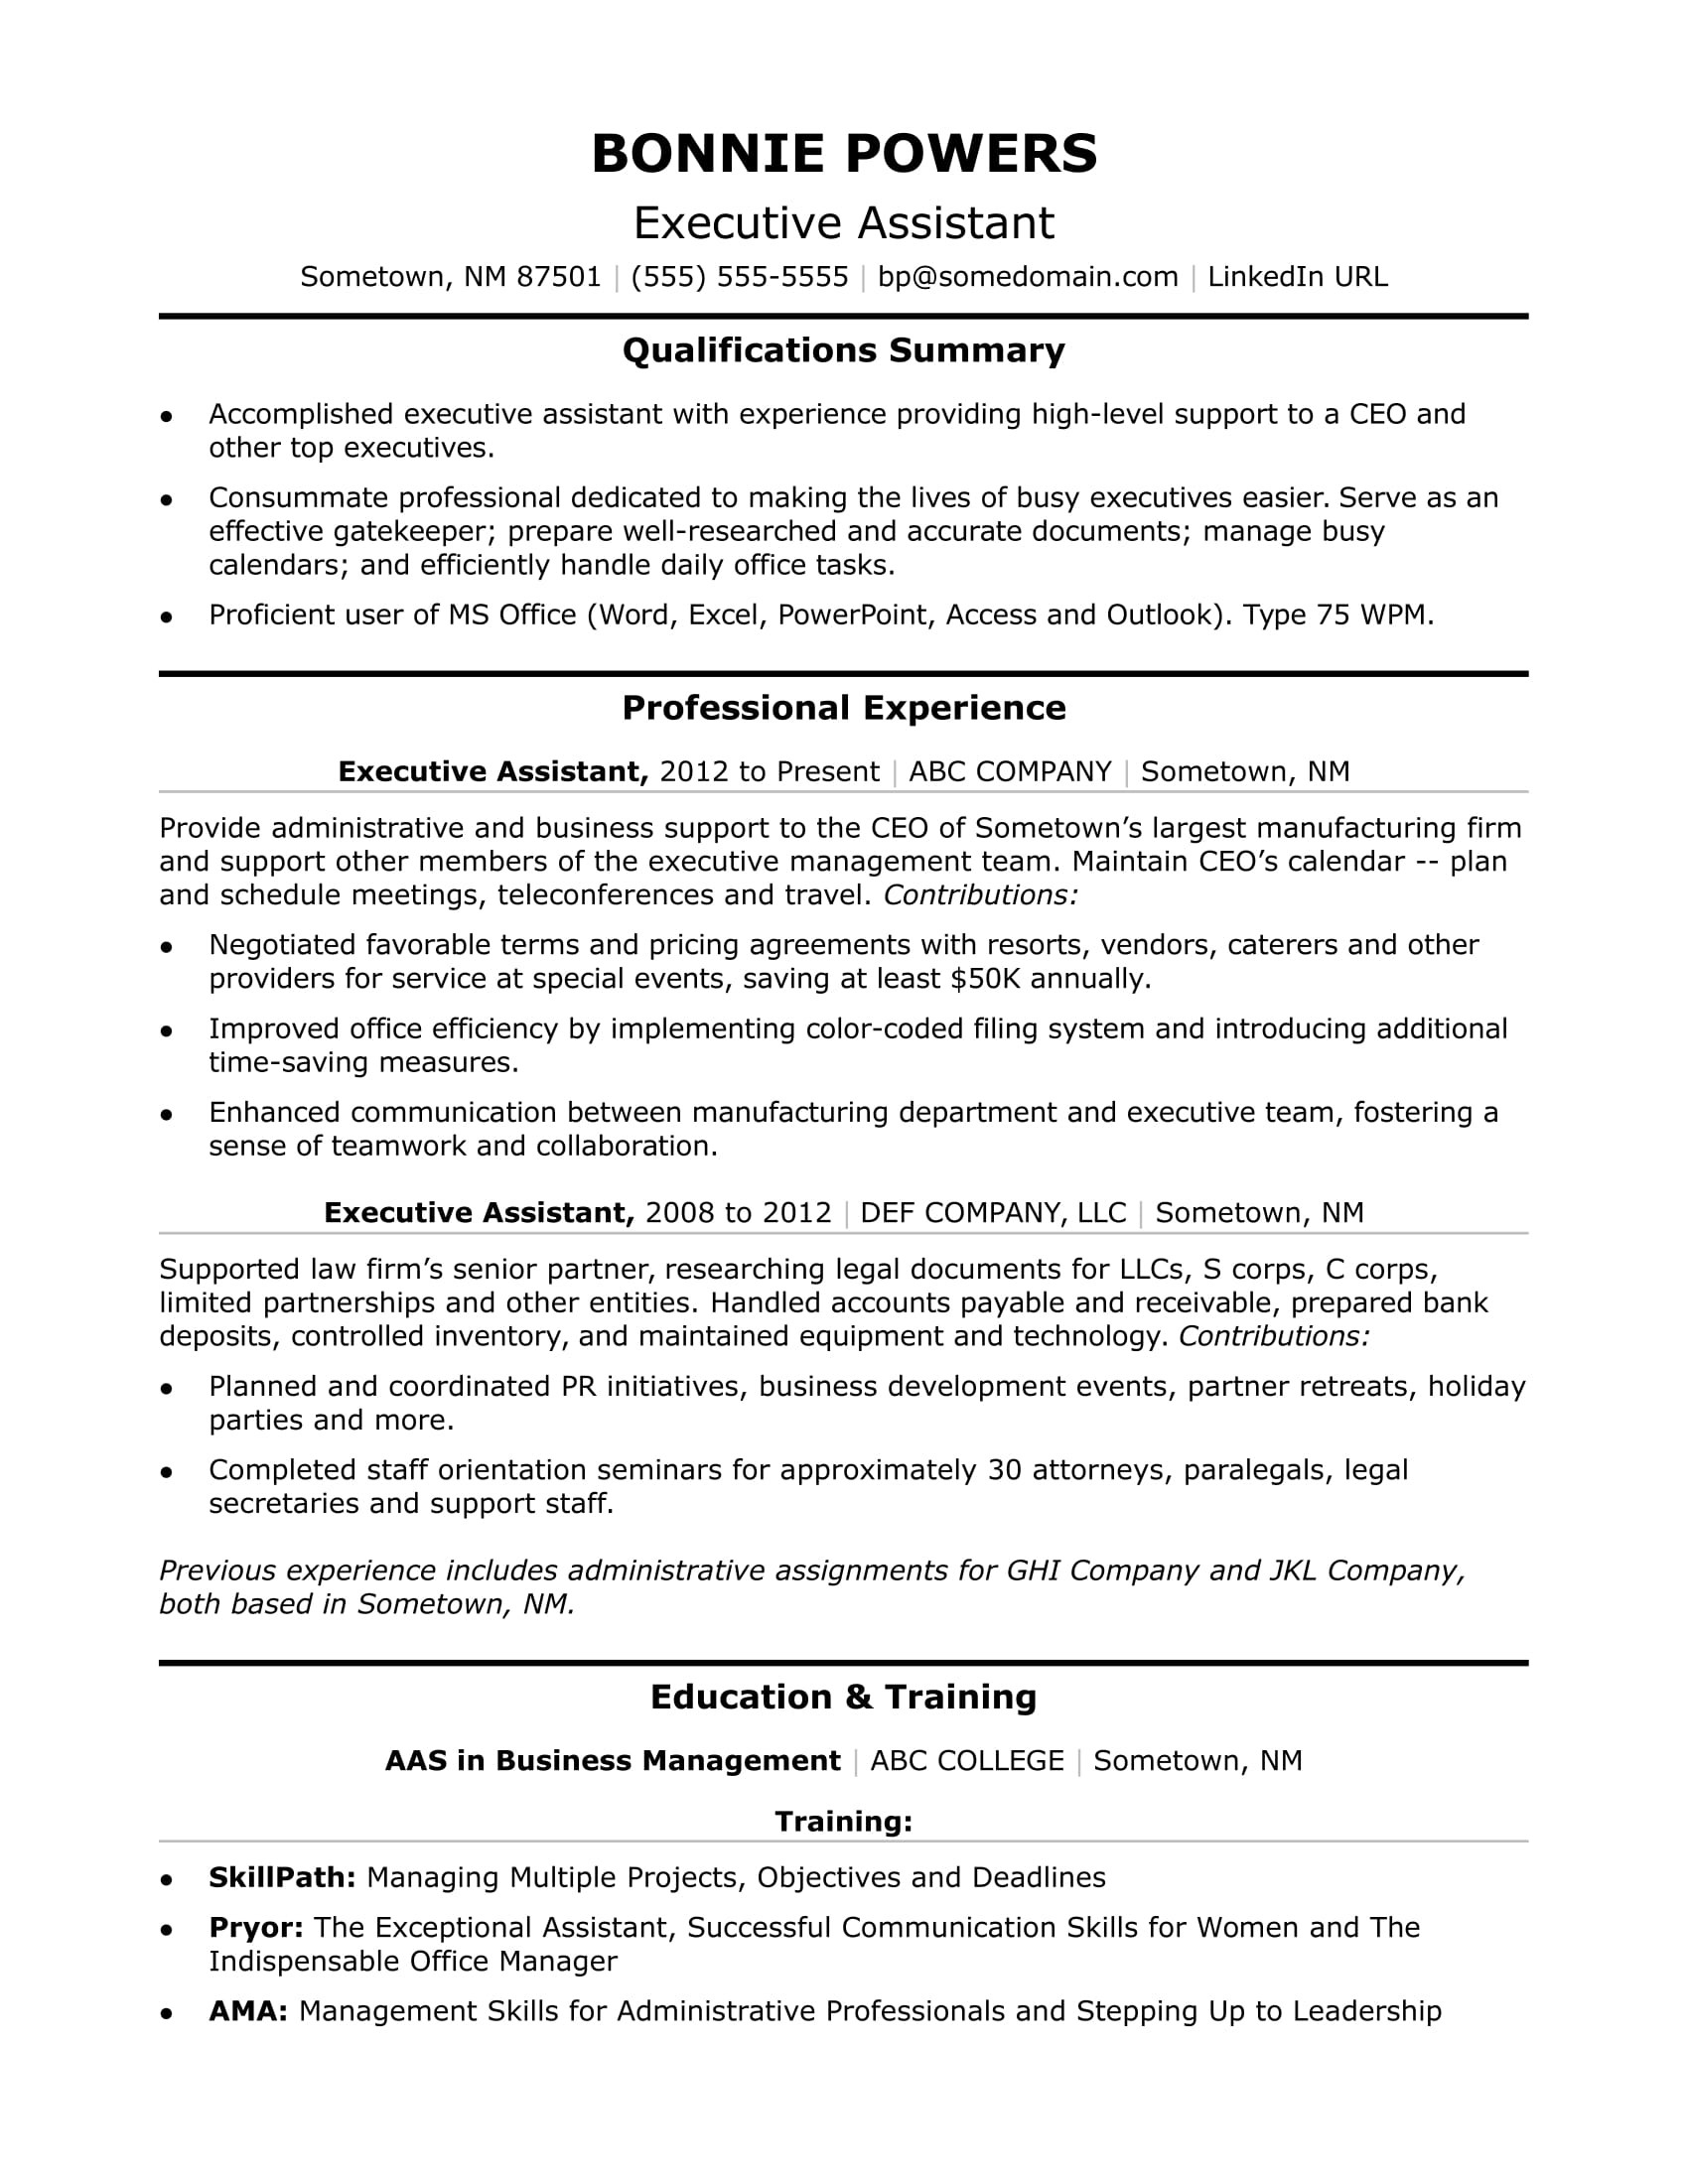 Sample Resume Of Email Support Executive Executive assistant Resume Monster.com